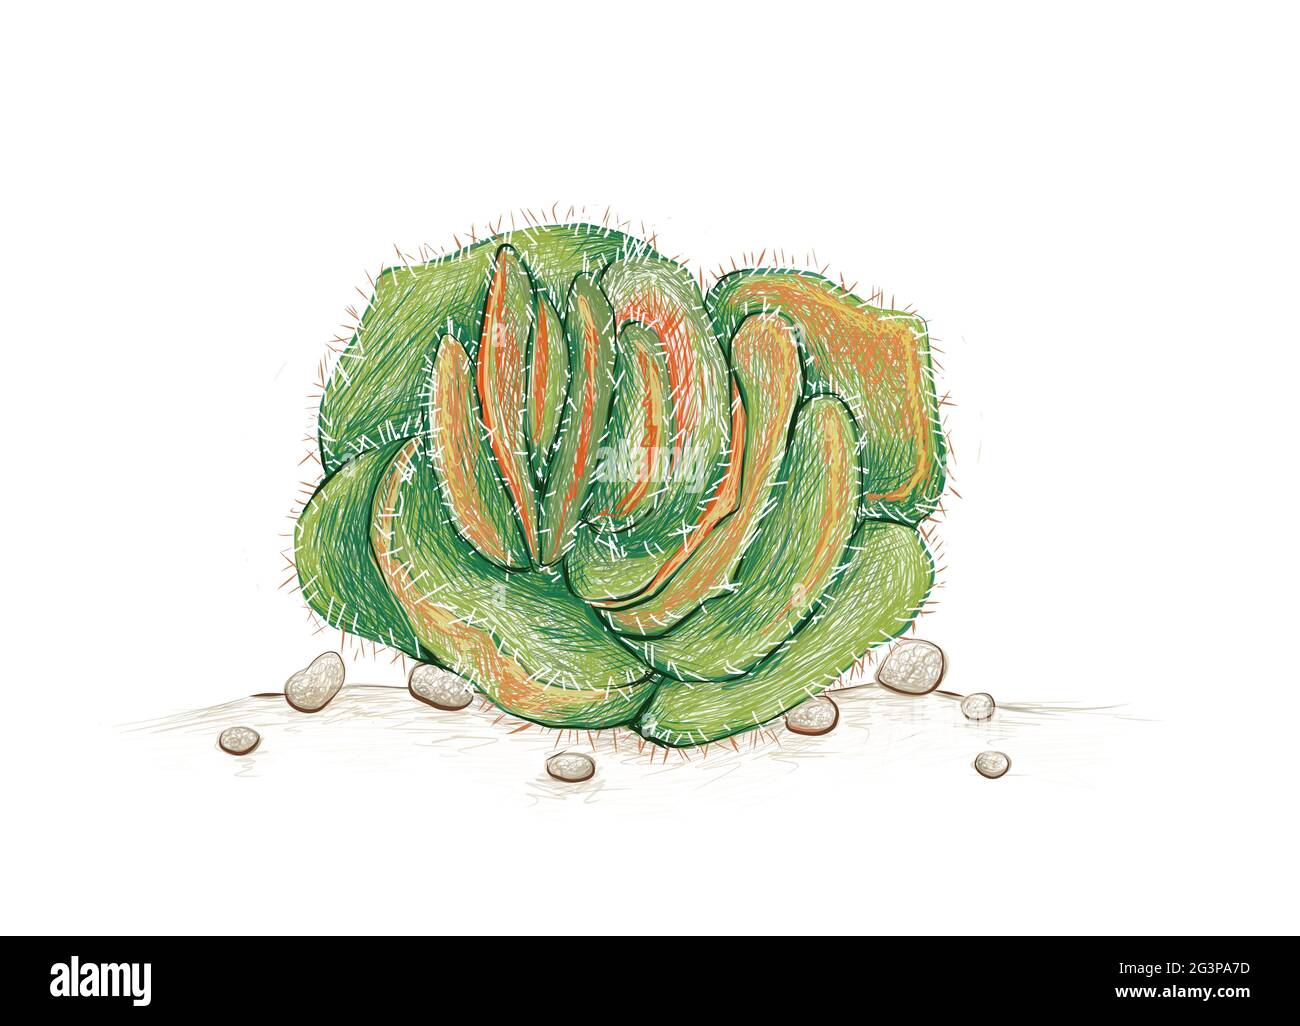 Illustration Hand Drawn Sketch of Crassula Tomentosa or Woolly Crassula. A Succulent Plants for Garden Decoration. Stock Photo